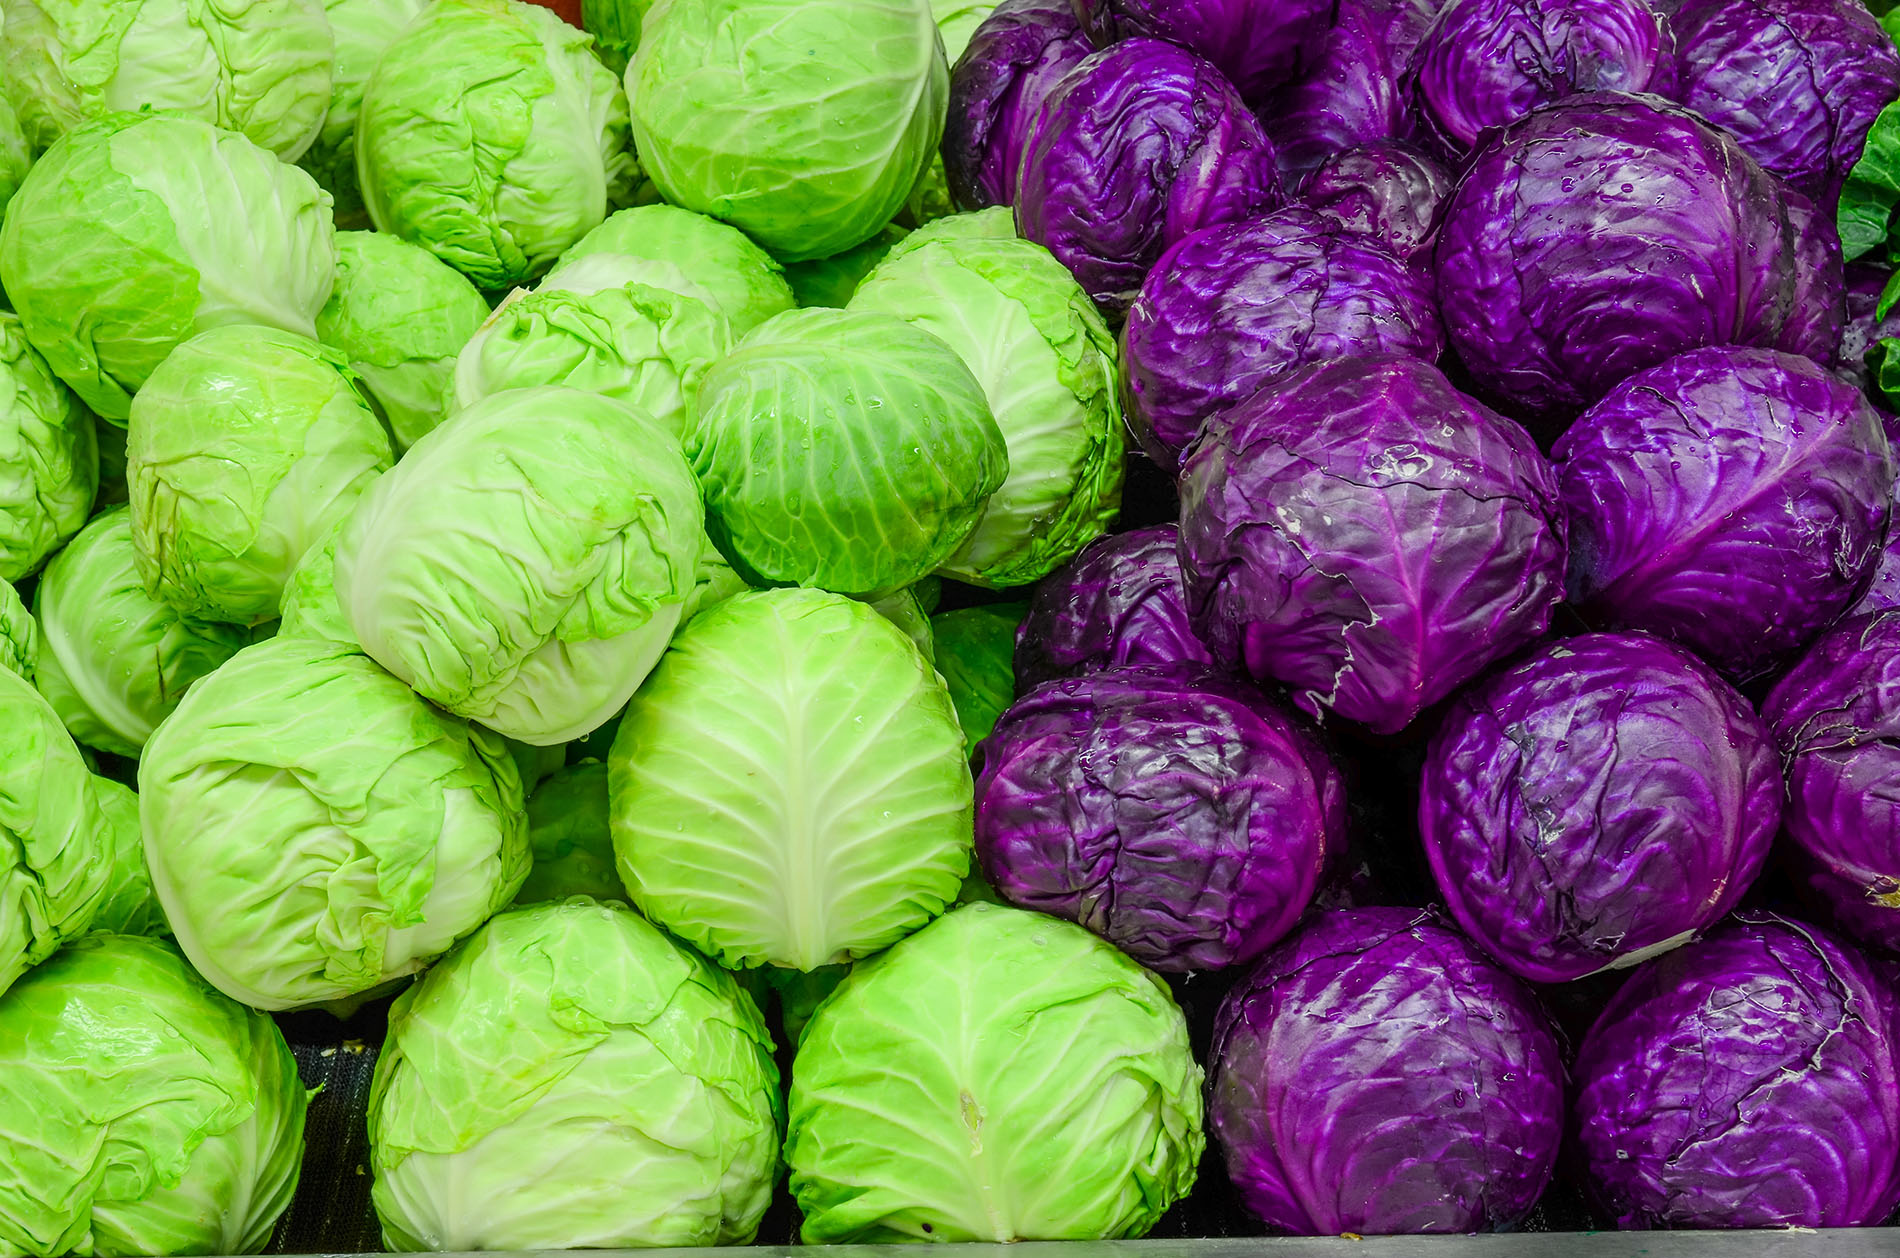 Heads of green and purple cabbage